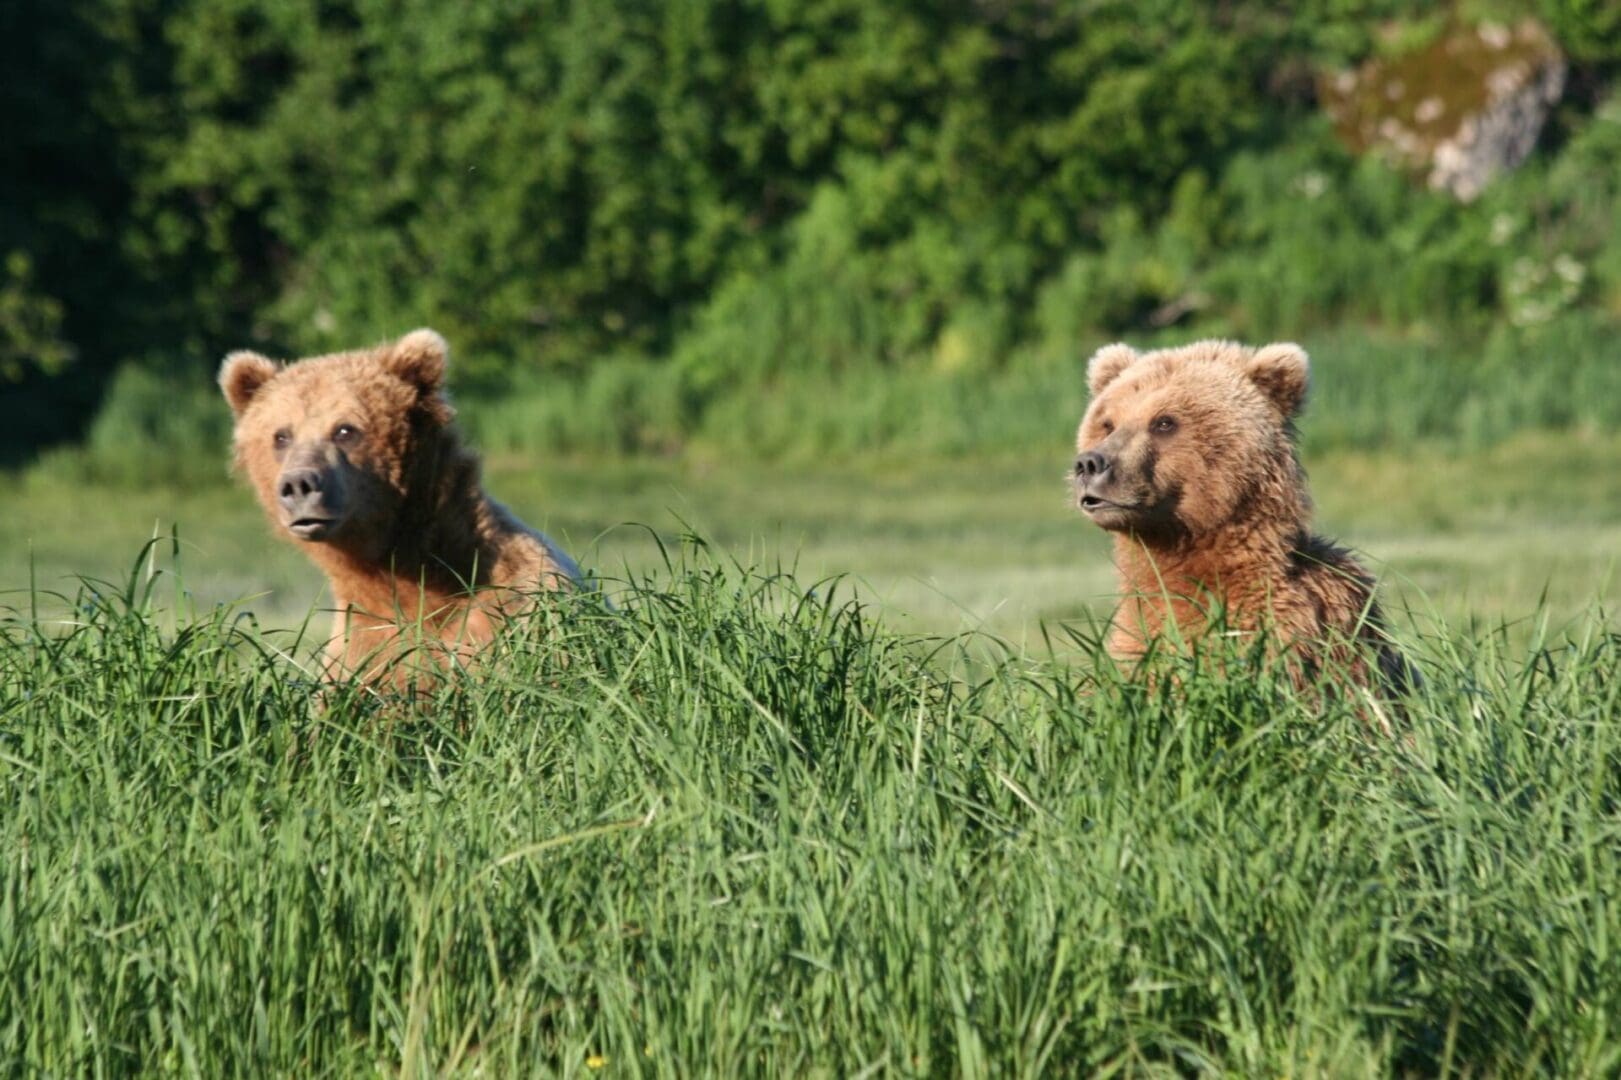 Two bears are standing in tall grass.